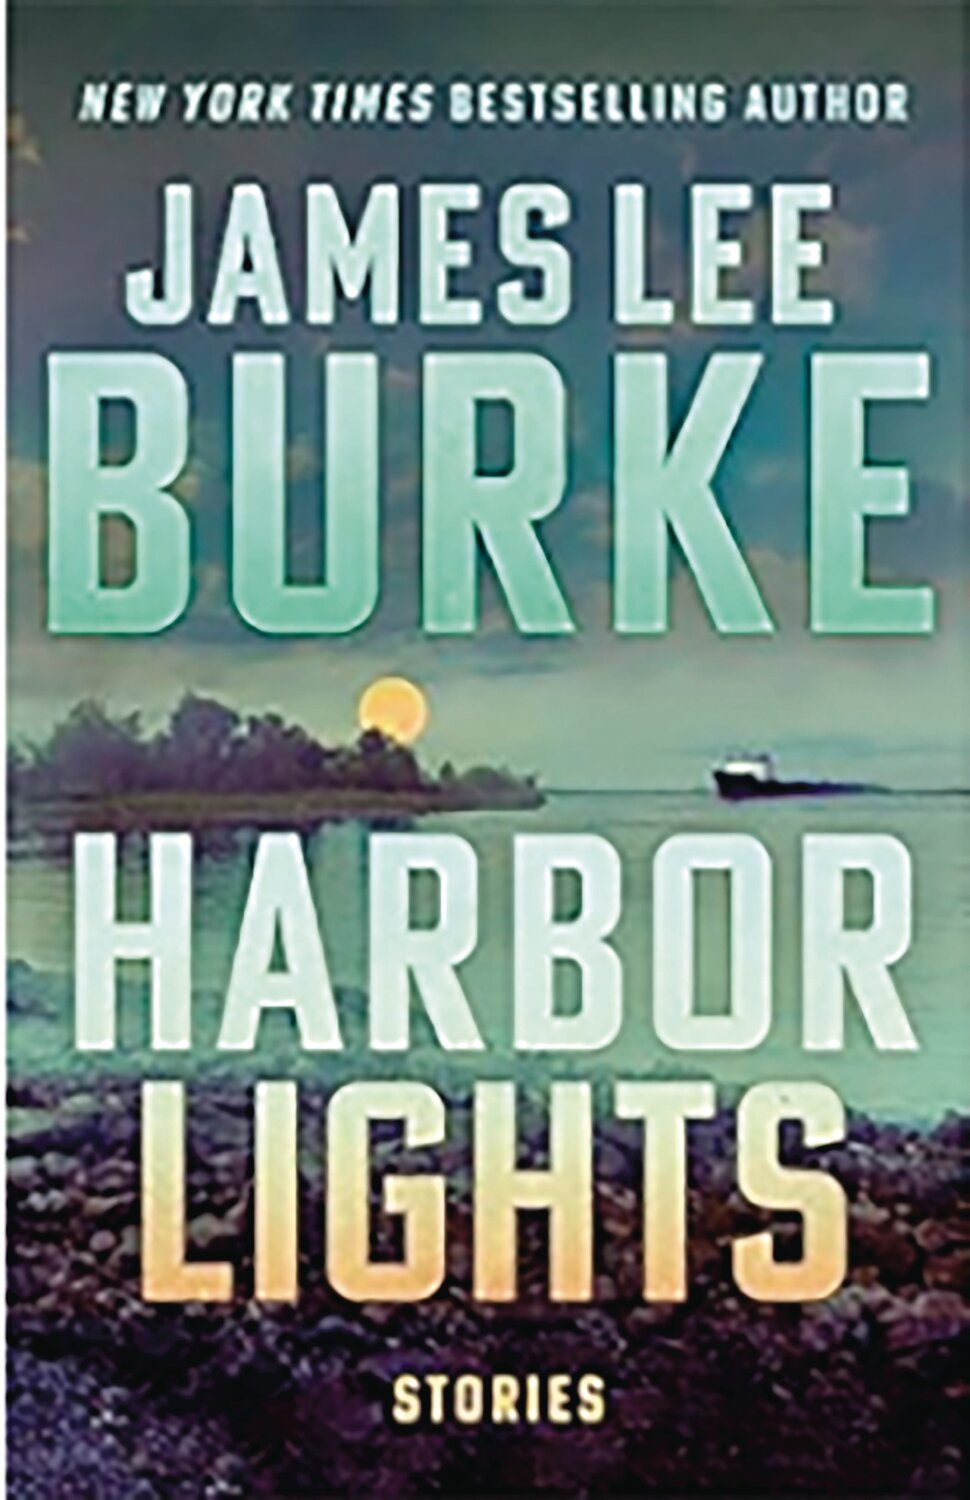 "Harbor Lights: Stories" by James Lee Burke
c.2024, Atlantic Monthly Press $27.00 358 pages